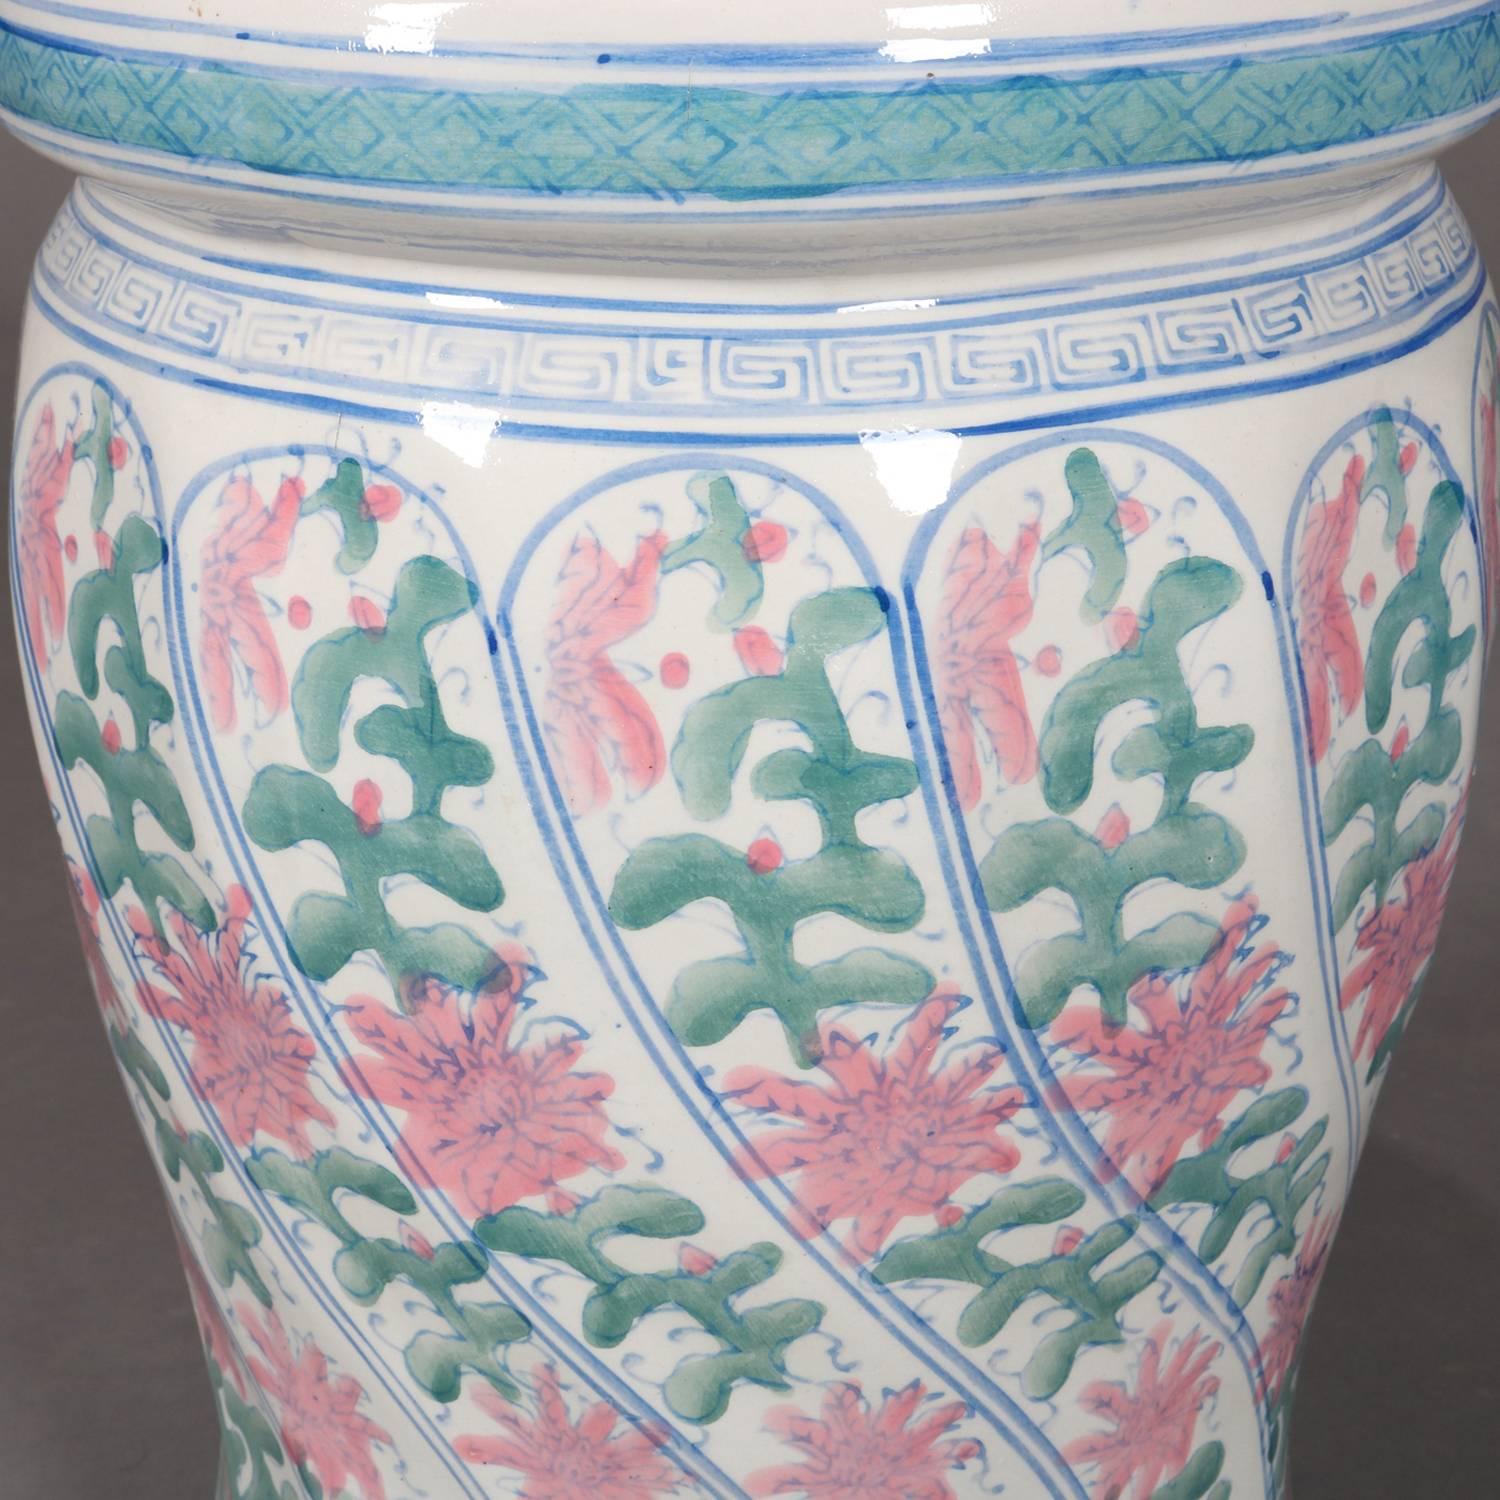 Chinese porcelain garden seat features cylindrical form with hand-painted stylized tobacco leaf design on pierced seat, repeating twisting panels of floral and foliate design, Greek key bordering , pastel palette, 20th century

Measures: 17